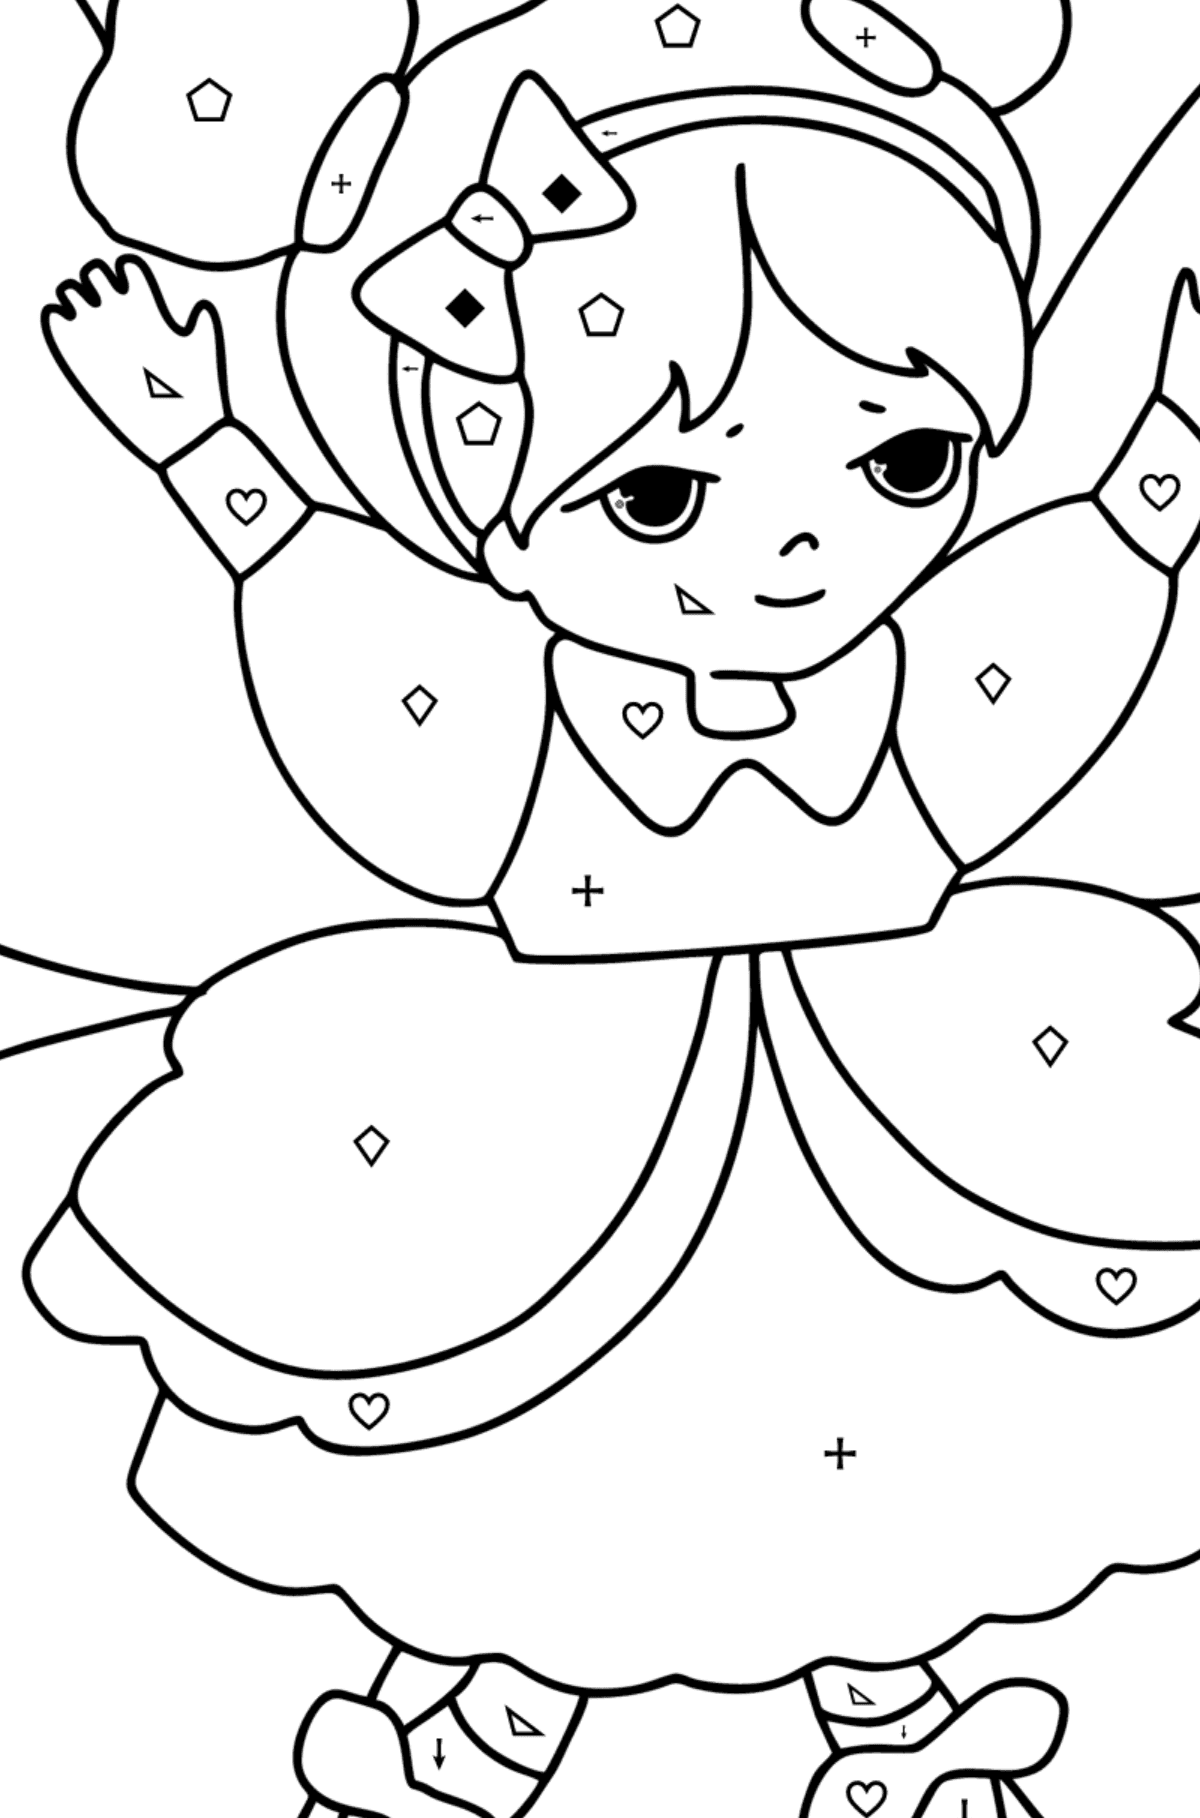 Flying Fairy coloring page - Coloring by Symbols and Geometric Shapes for Kids